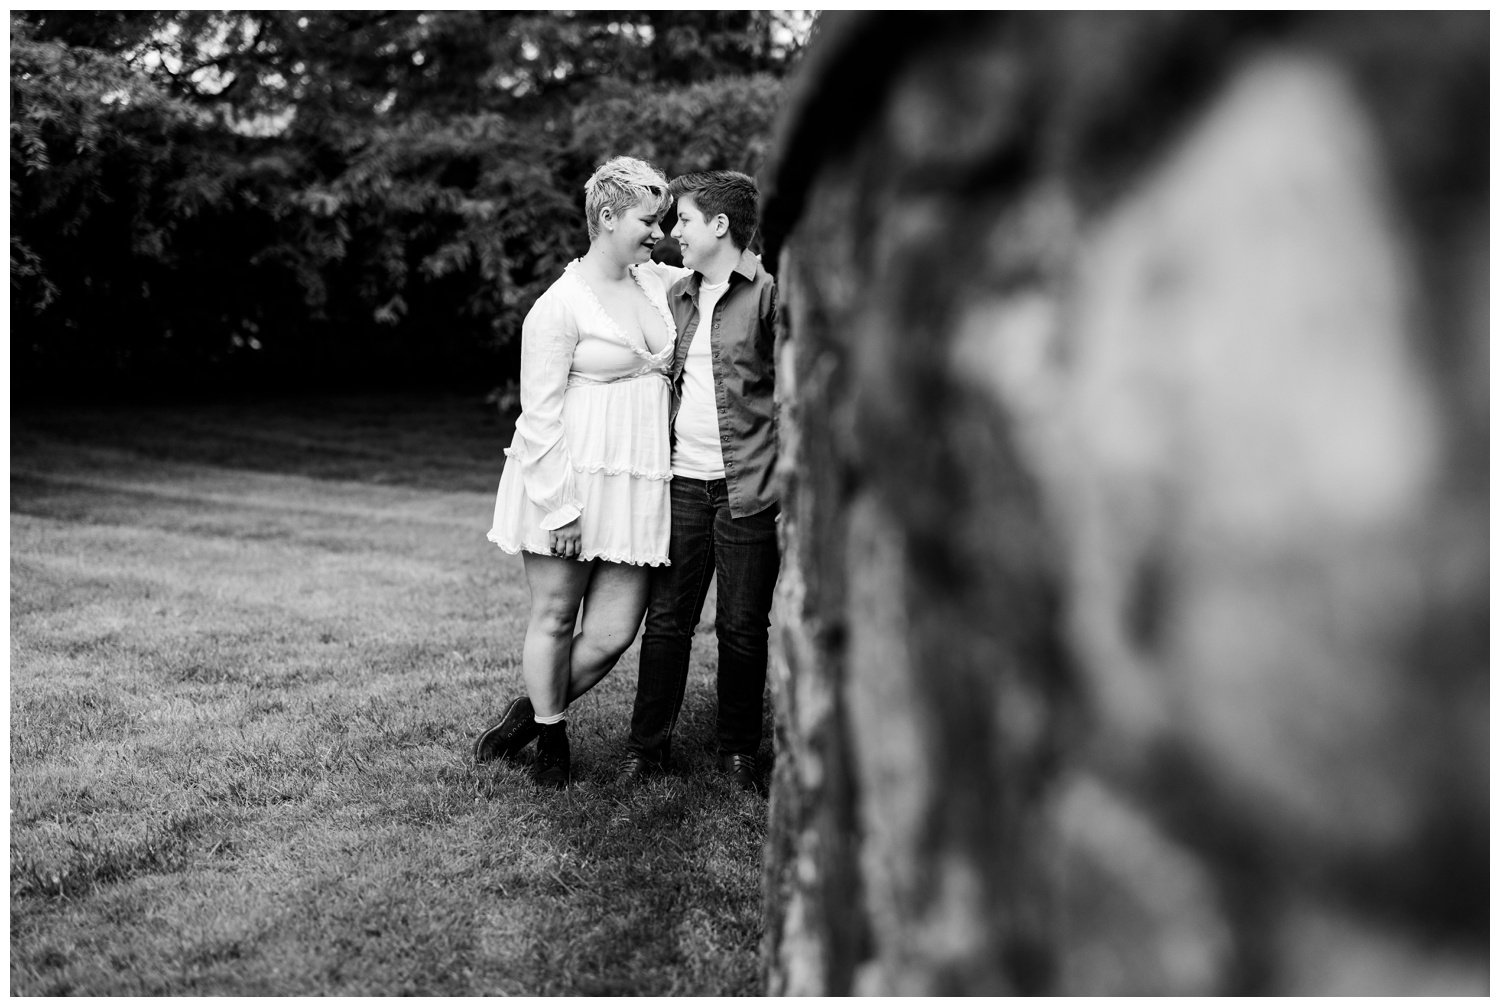 Queer-Engagement-Photos-Longwood-Gardens-Philly-Photographer-LGBTQ-5.jpg